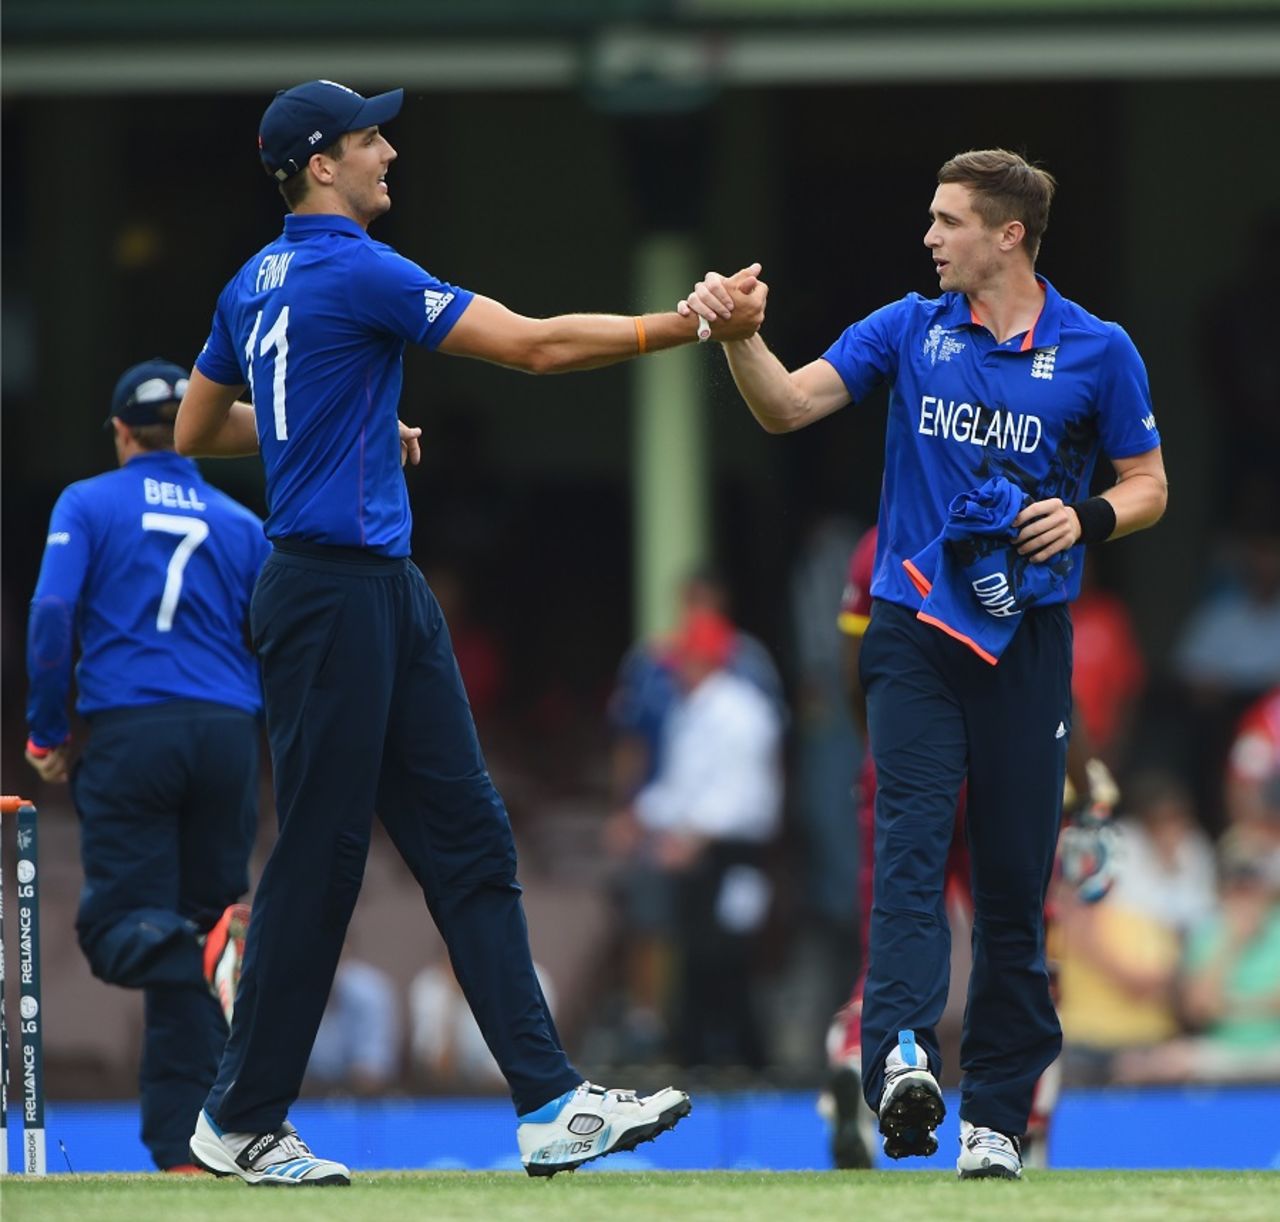 Steven Finn and Chris Woakes shared seven wickets between them, England v West Indies, World Cup warm-up match, Sydney, February 9, 2015